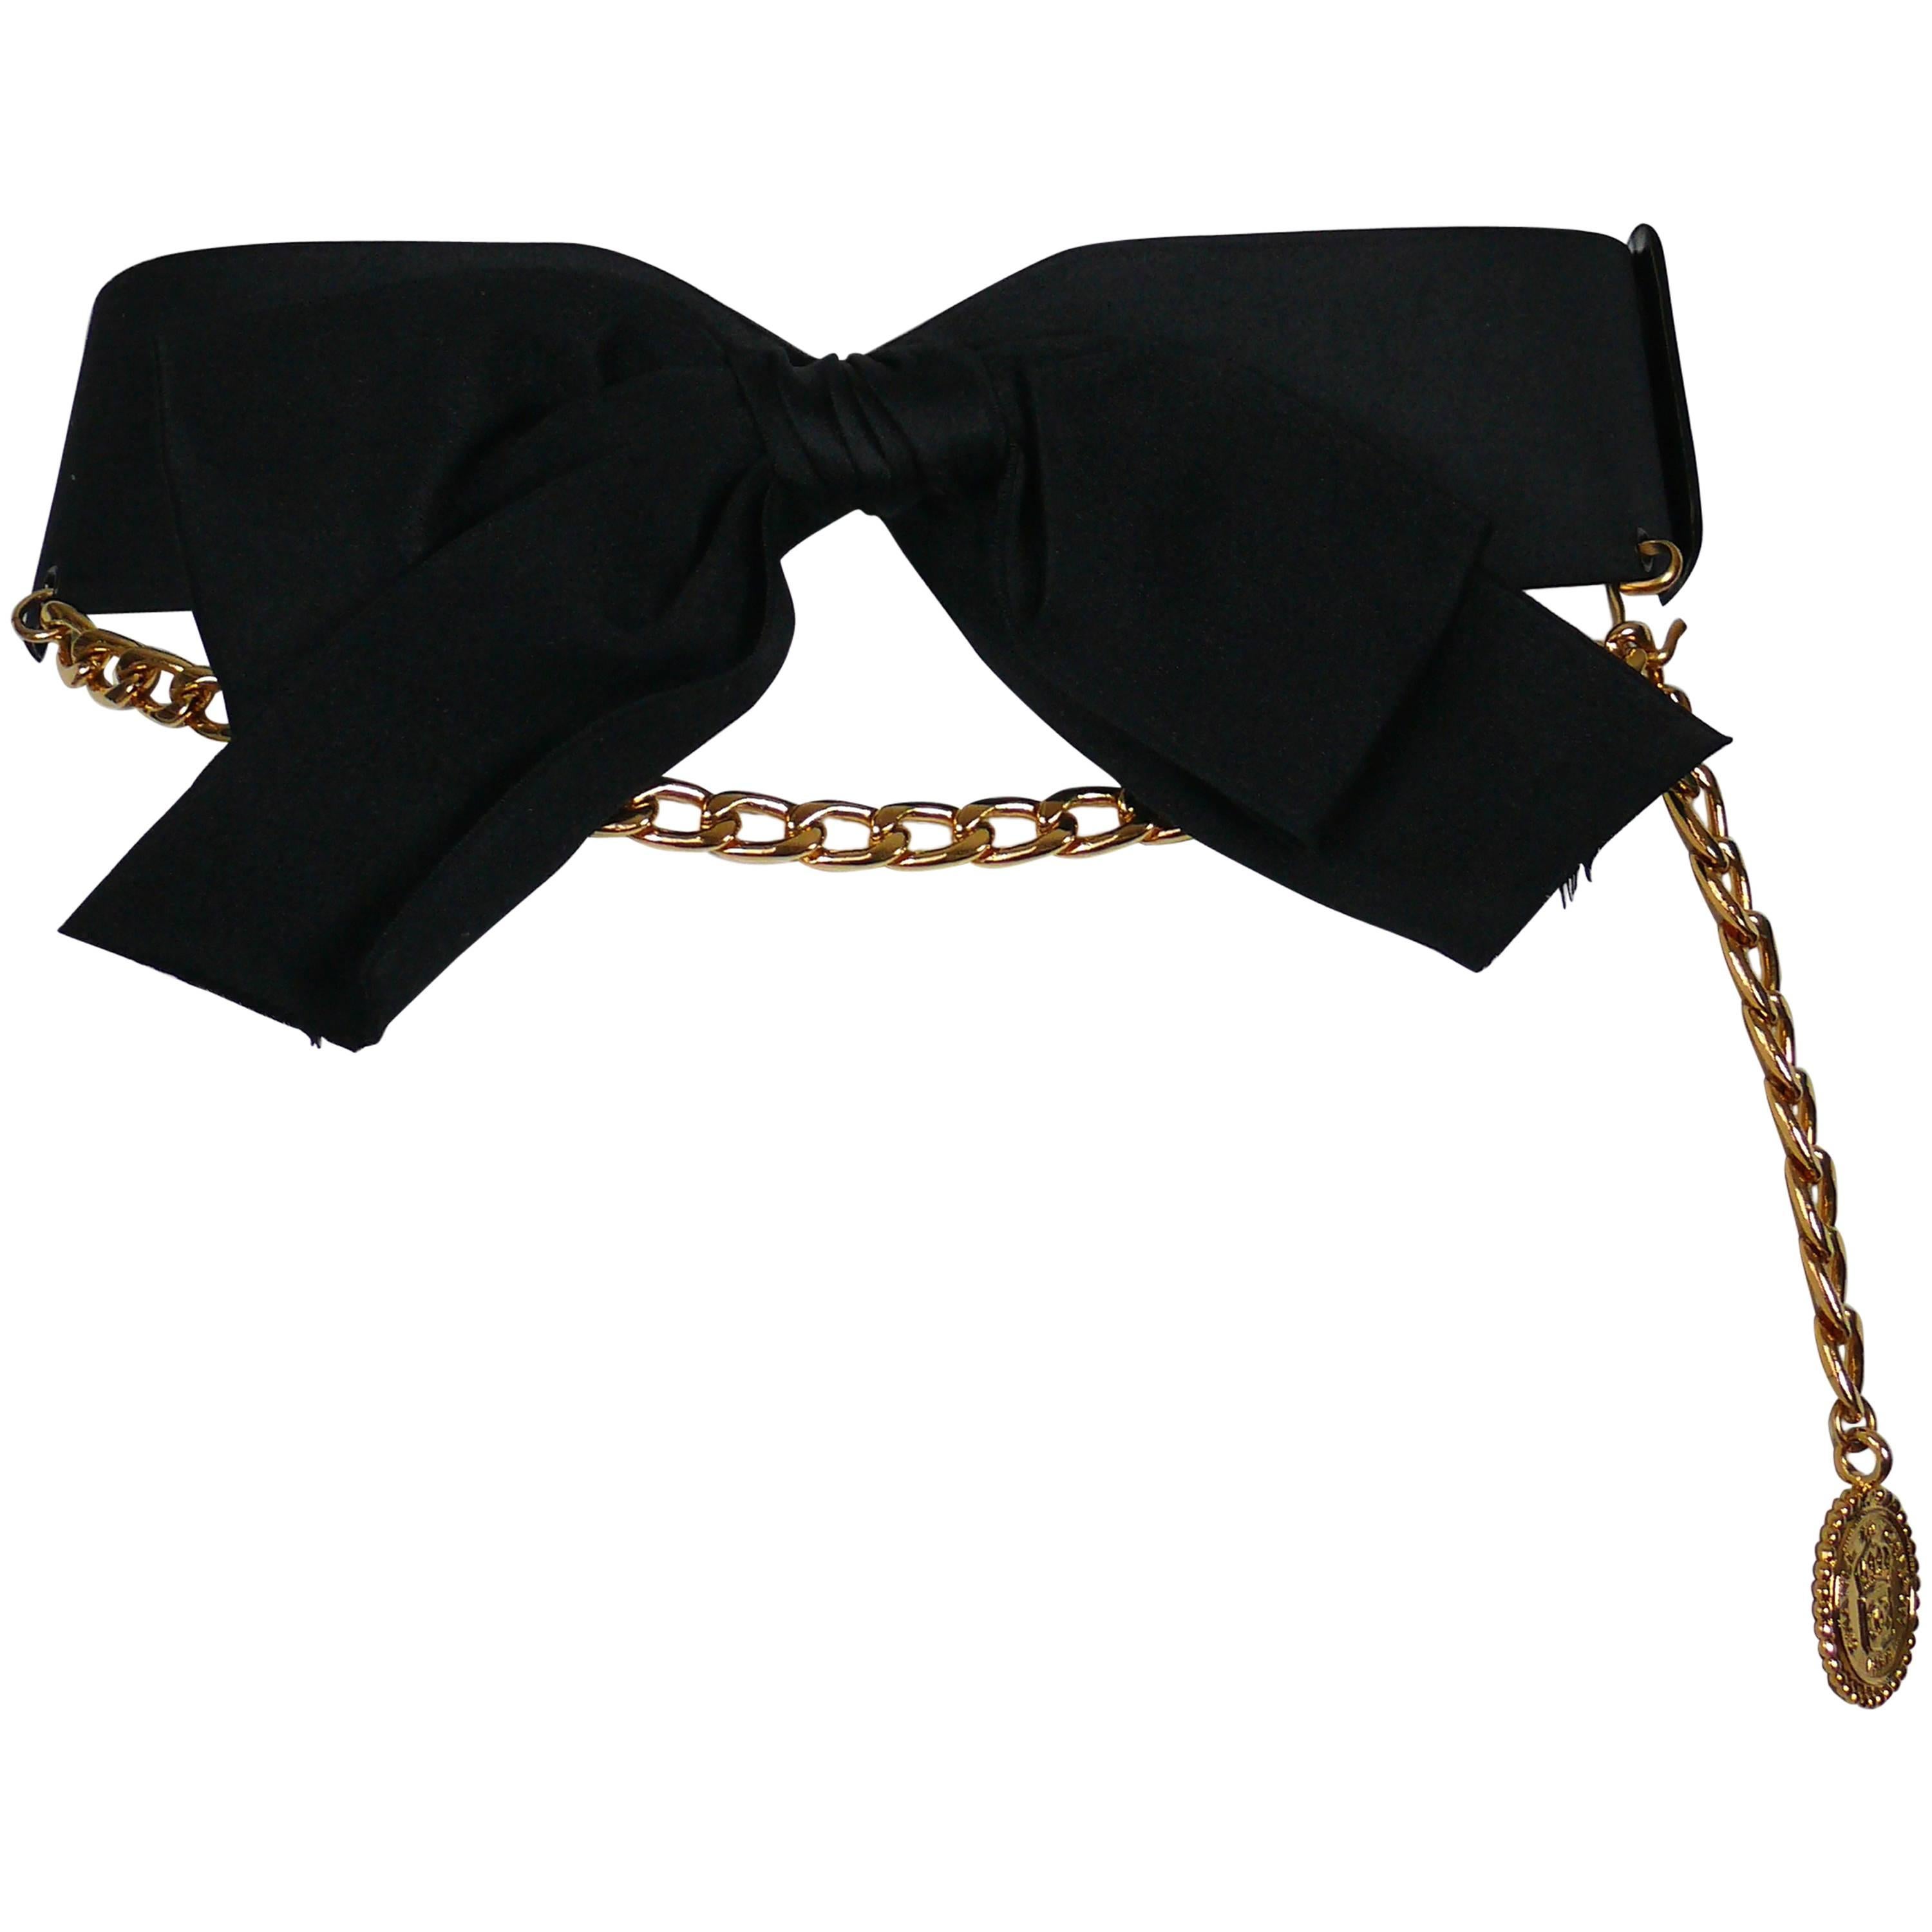 Chanel Black Silk Bow Belt and Chain